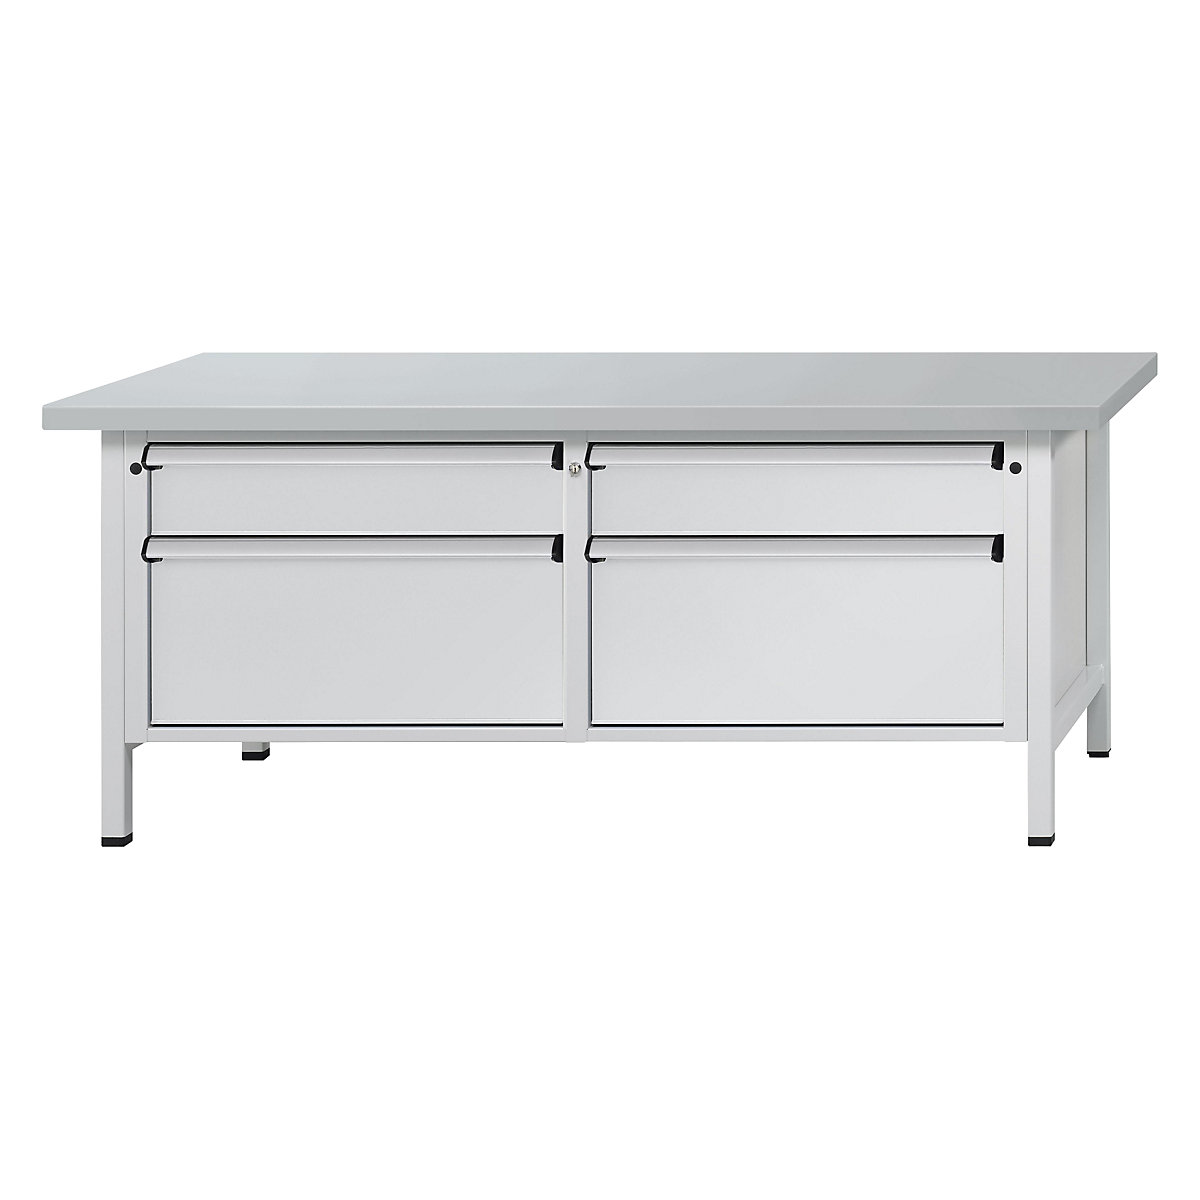 Workbench with XL/XXL drawers, frame construction – ANKE, width 2000 mm, 4 drawers, sheet steel covered worktop, front in light grey-13